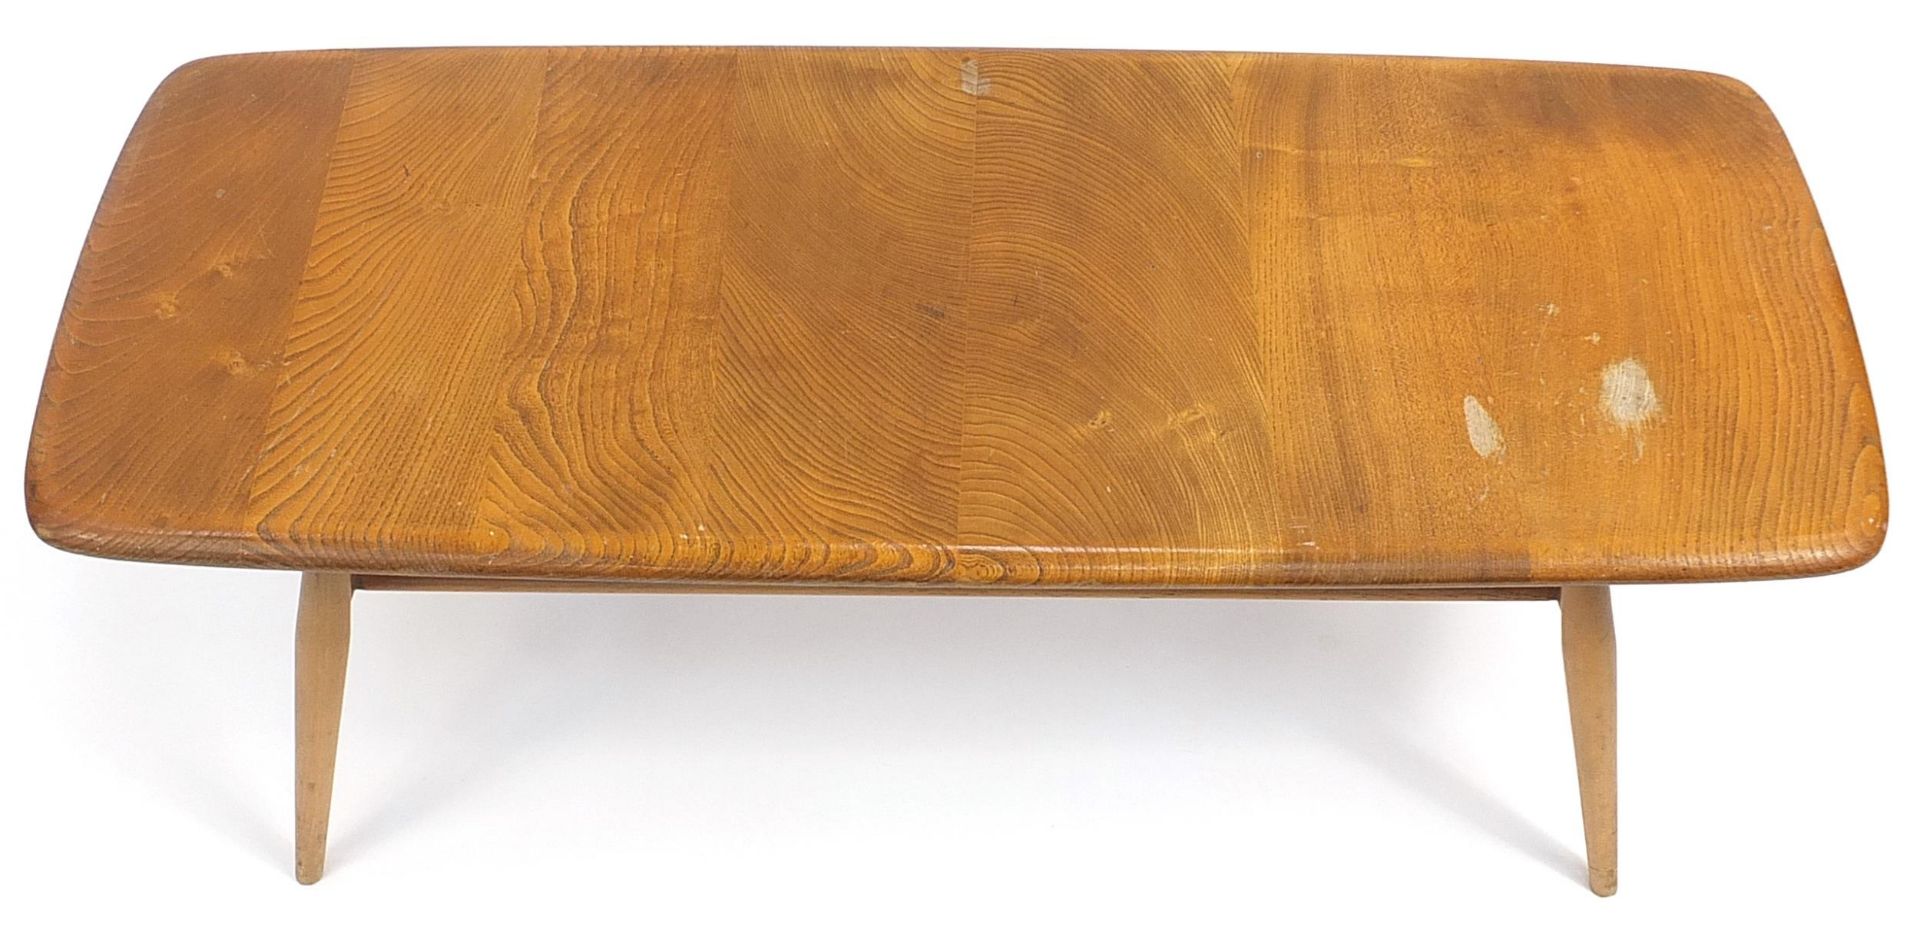 Ercol Winsor light elm coffee table with under tier, 36cm H x 106cm W x 43cm D - Image 3 of 5